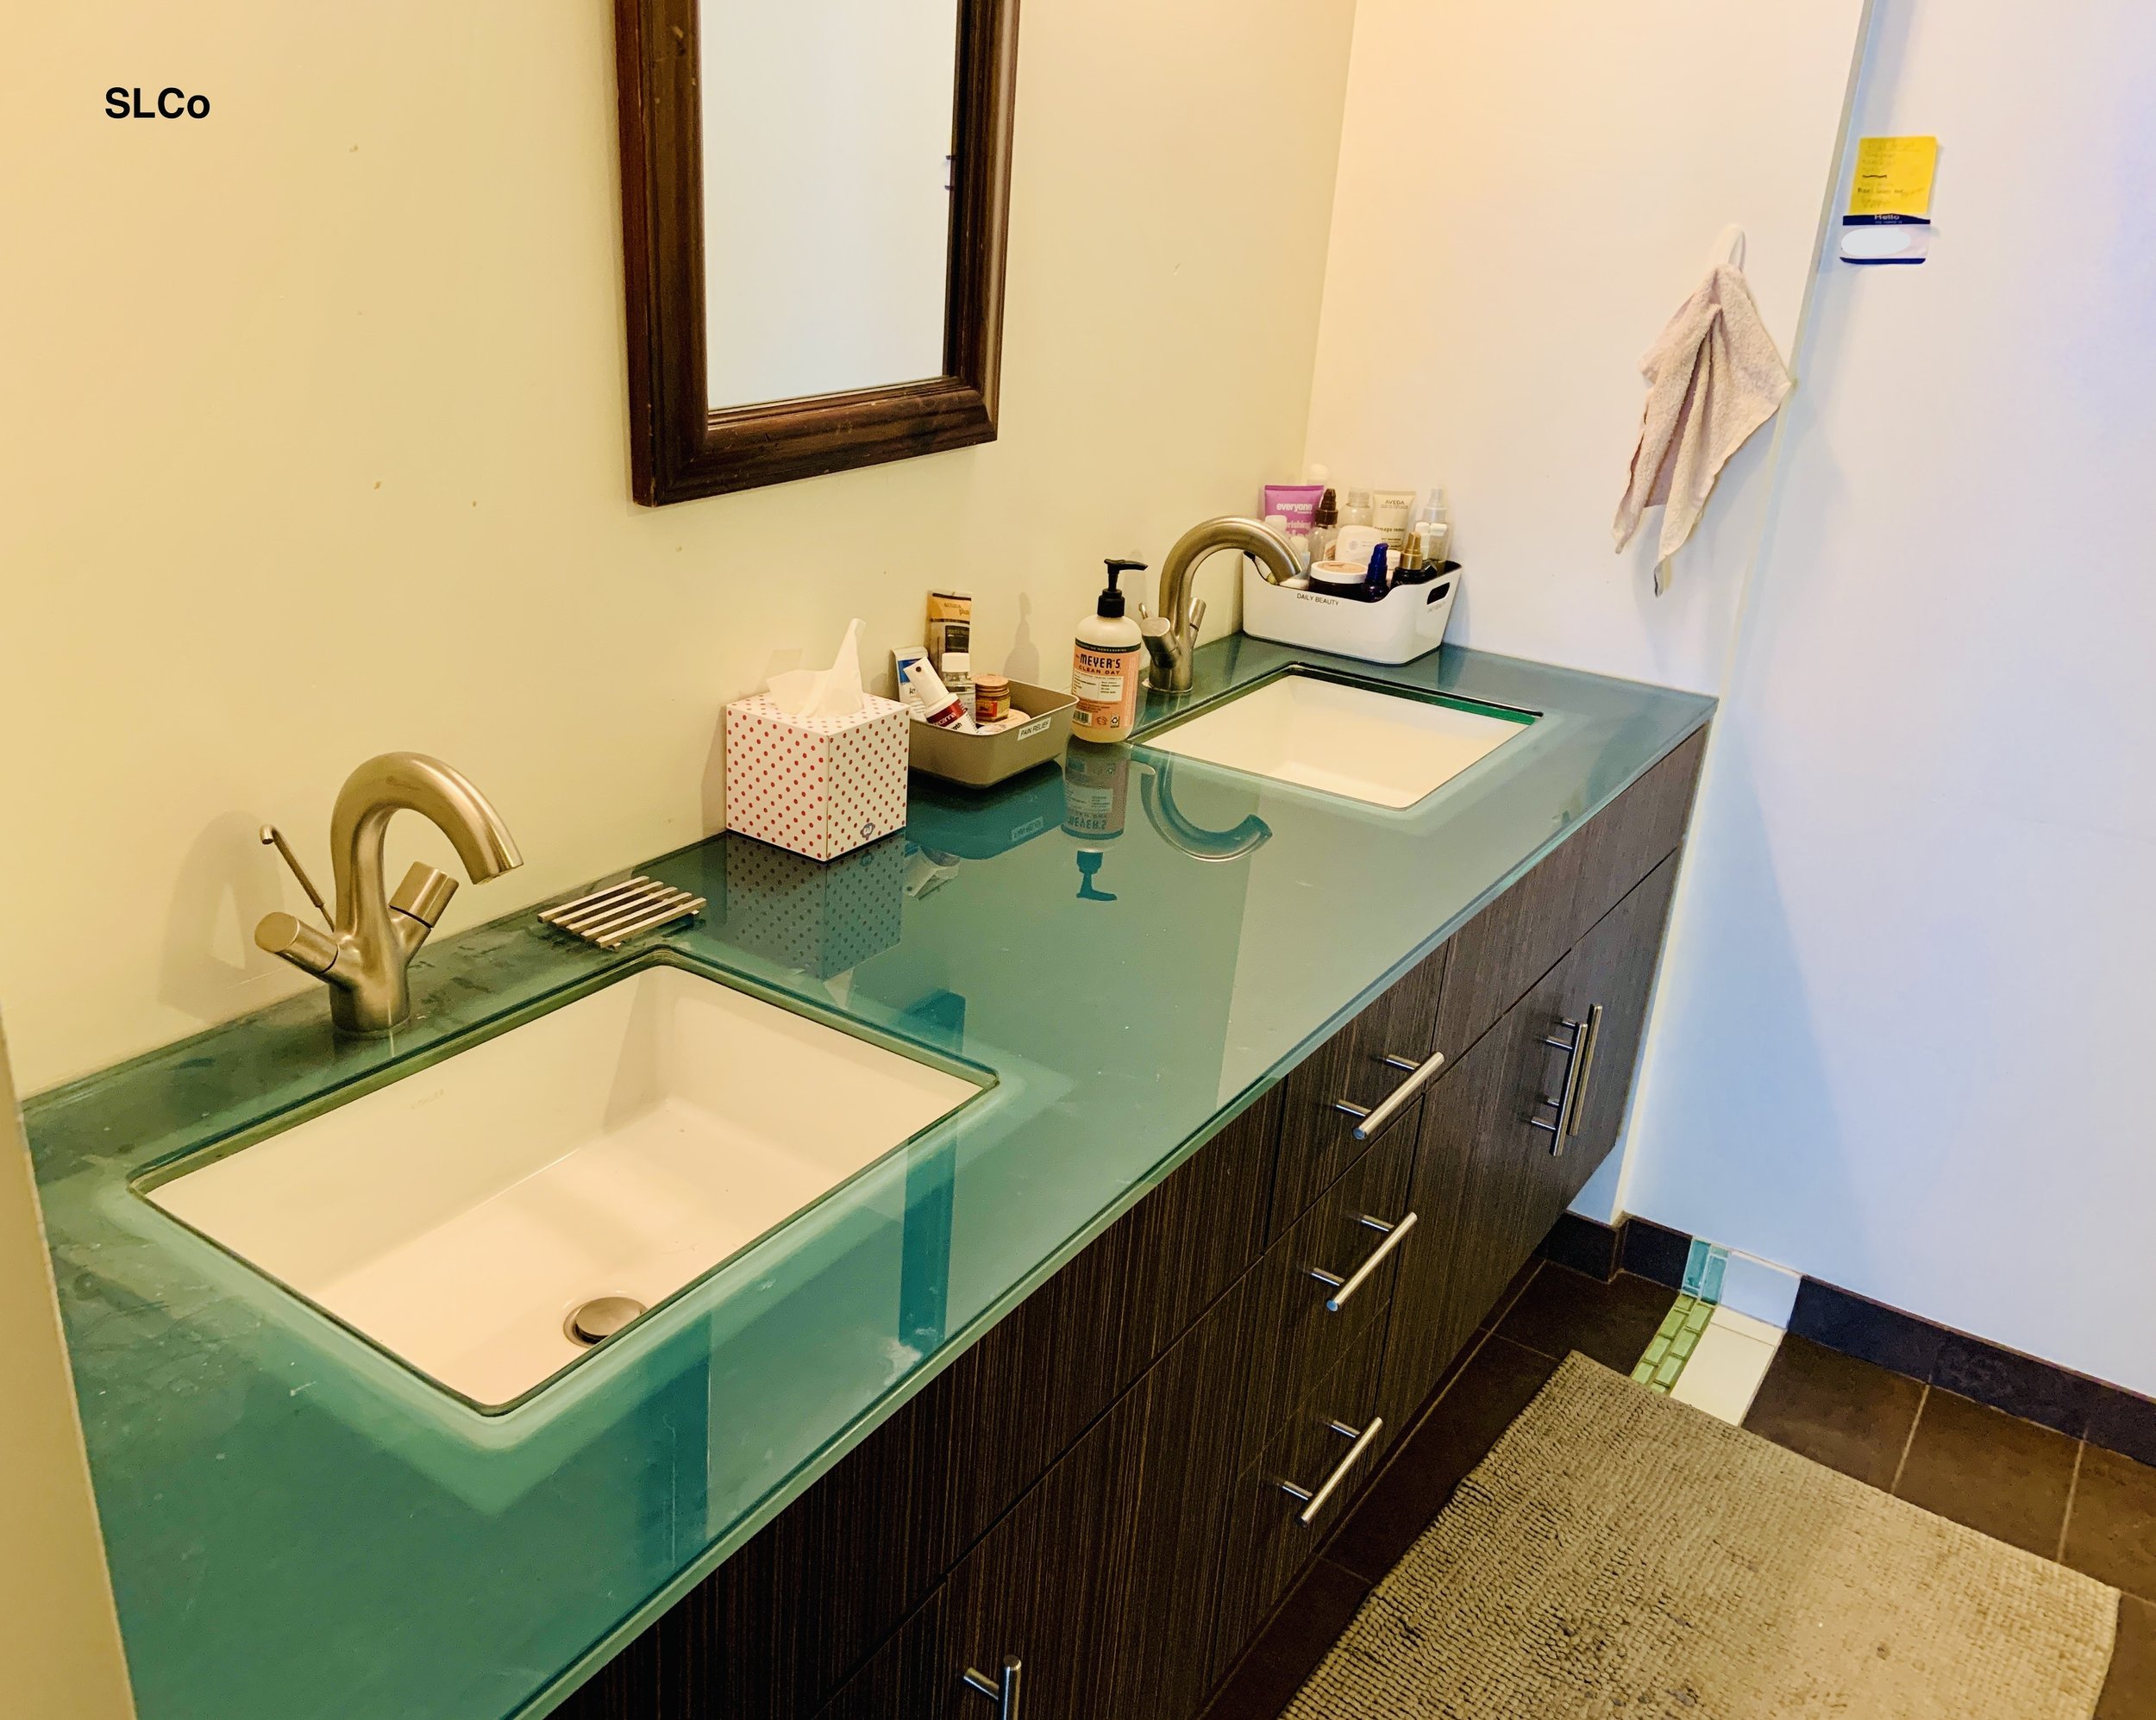 After photo of bathroom counter with very few items on counter, can see trans-blue glass counter on dark wooden shelves, and see both sinks.